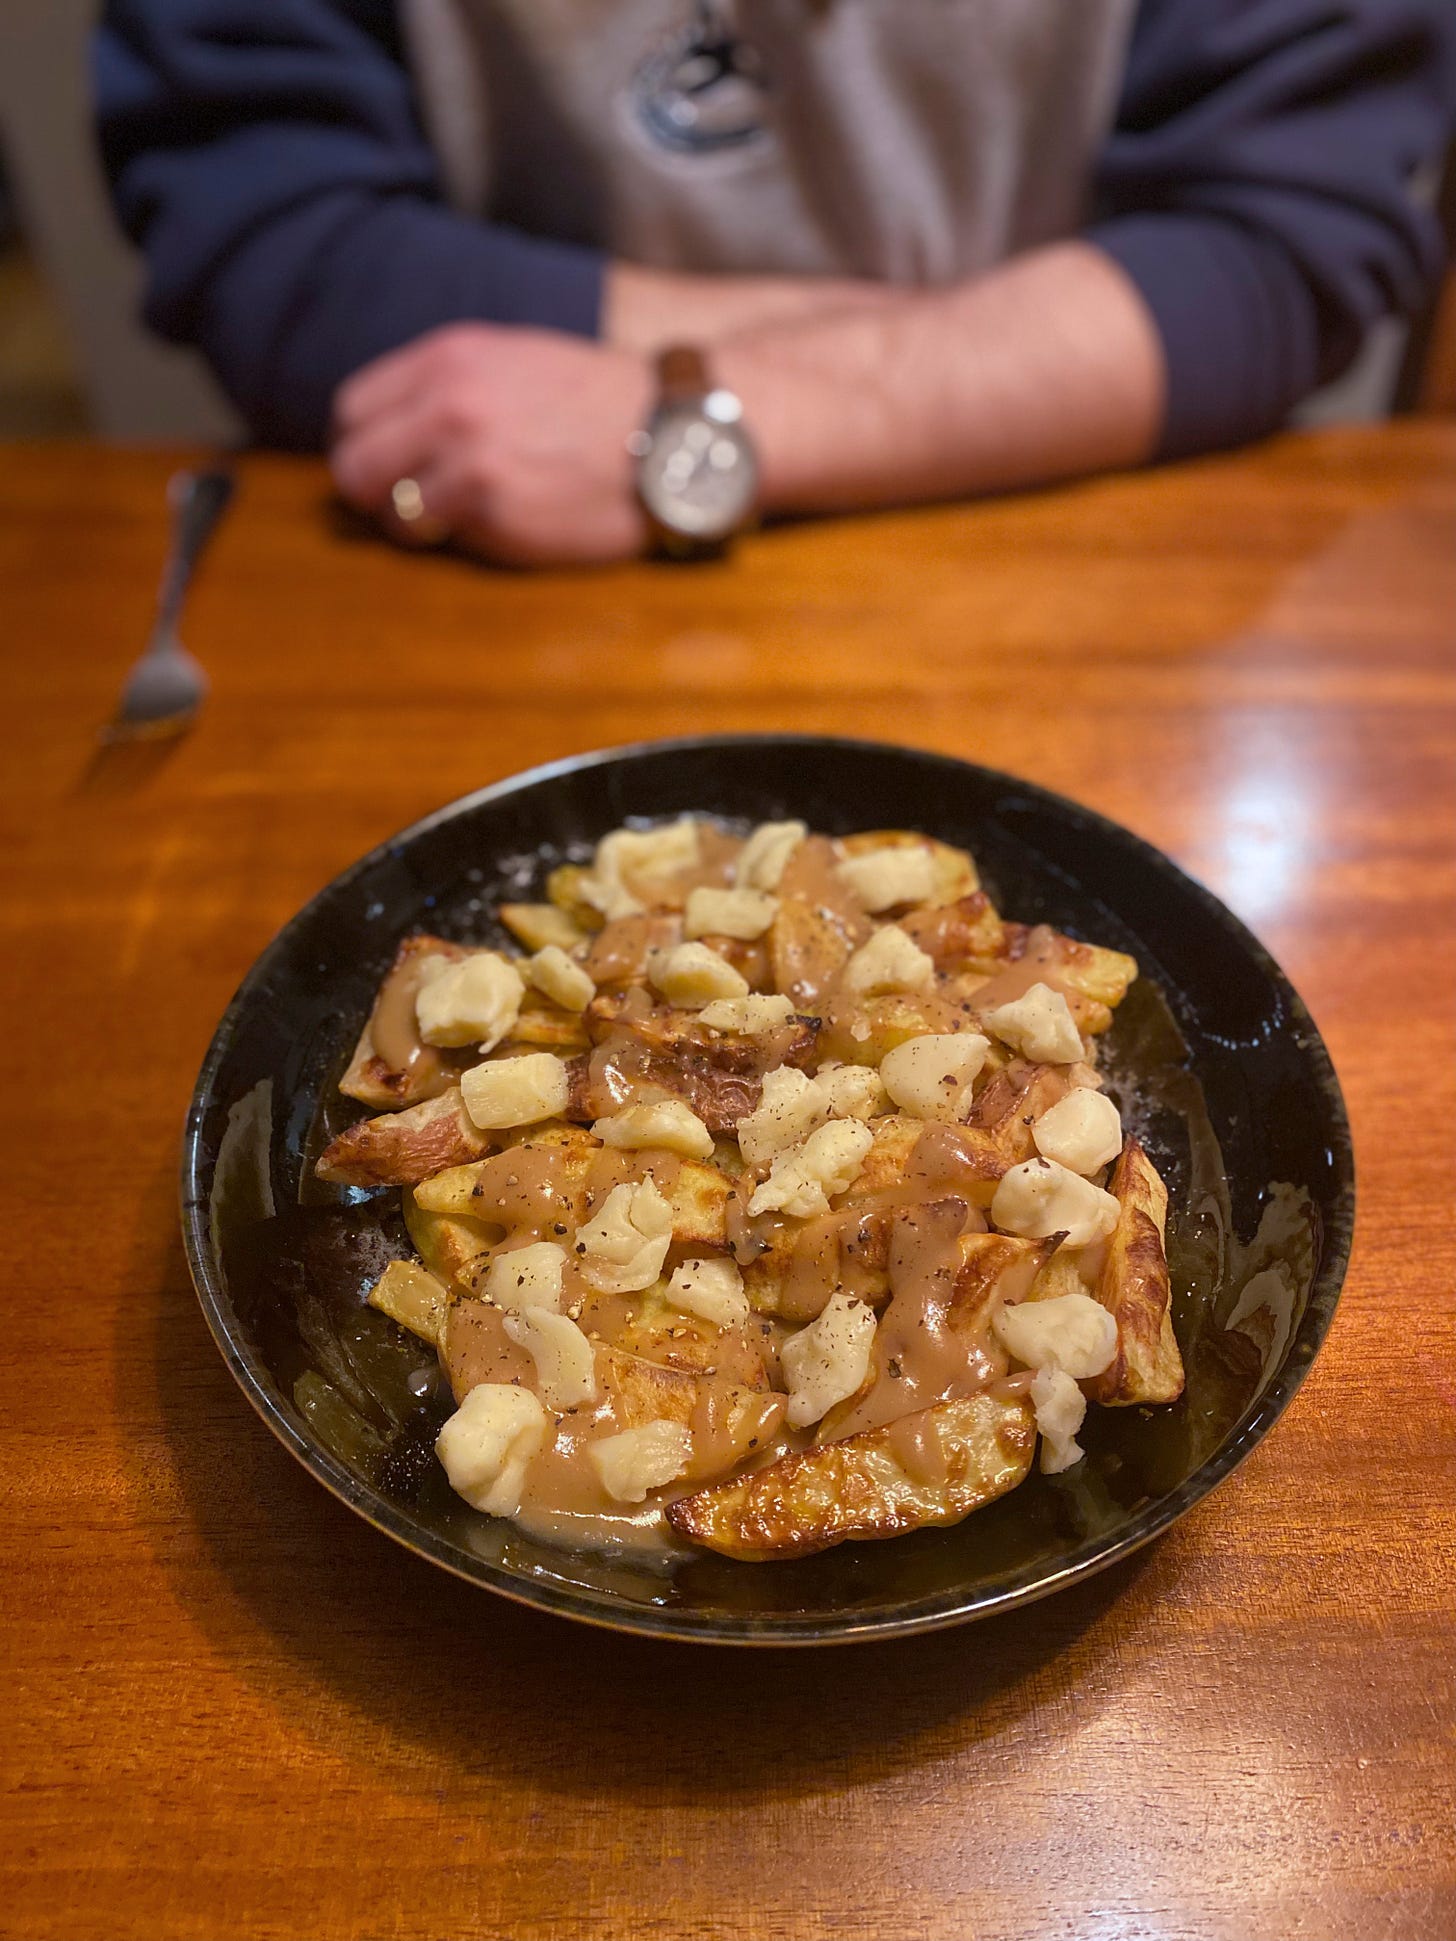 A black serving dish of poutine: small wedge fries covered in gravy, cheese curds, and black pepper. In the background, Jeff sits at the table, his arms resting on it next to his fork.